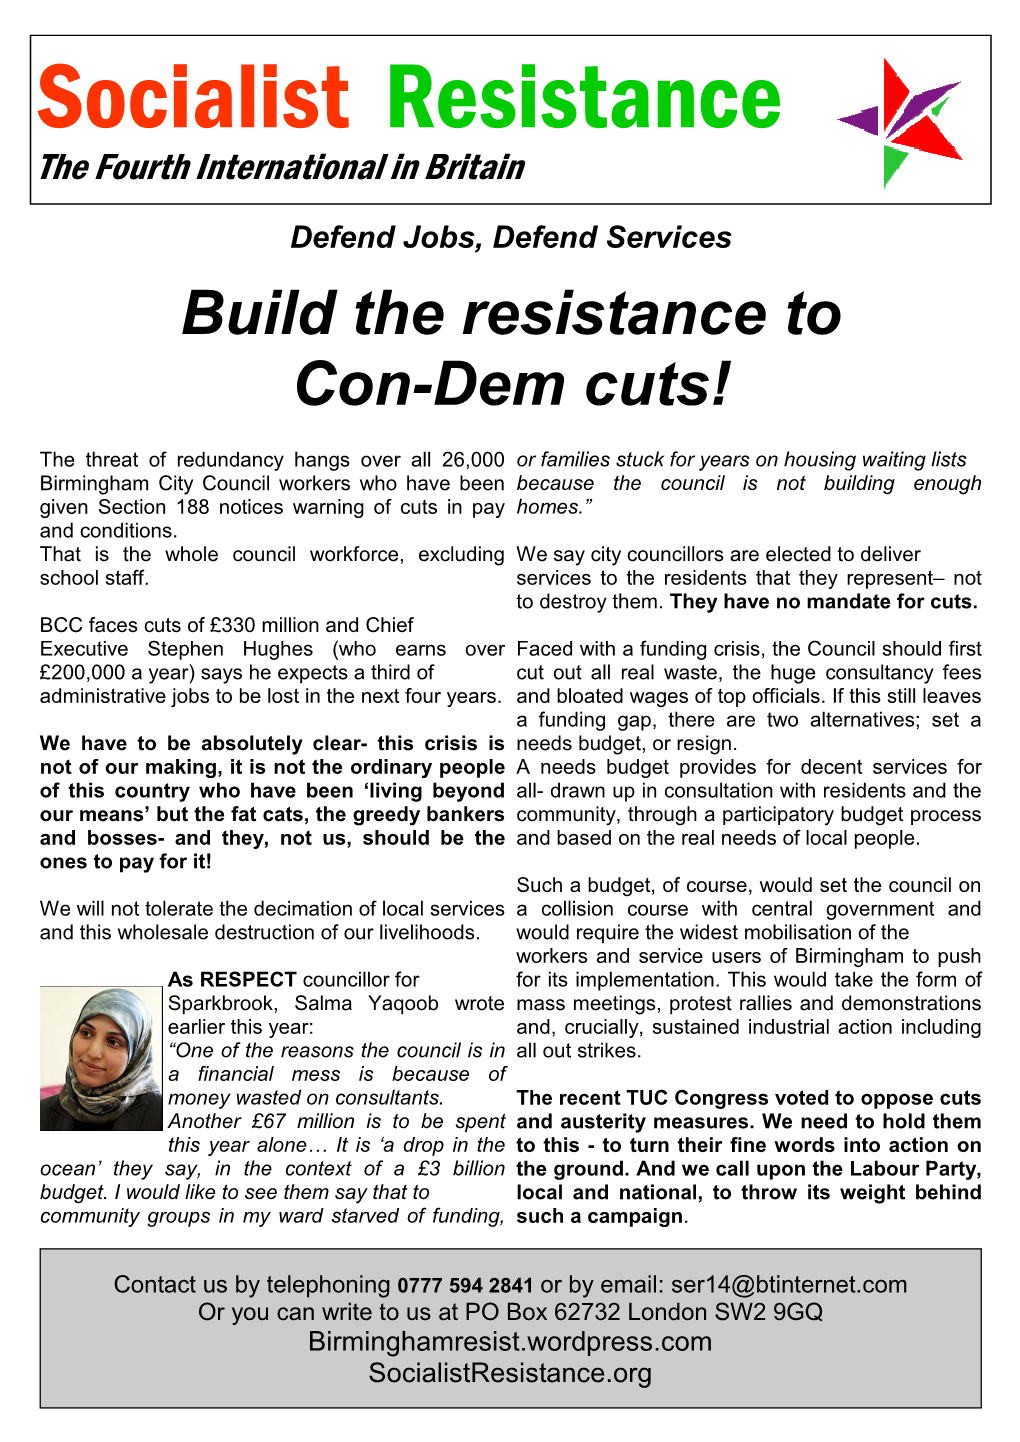 New Leaflet Distributed by Socialist